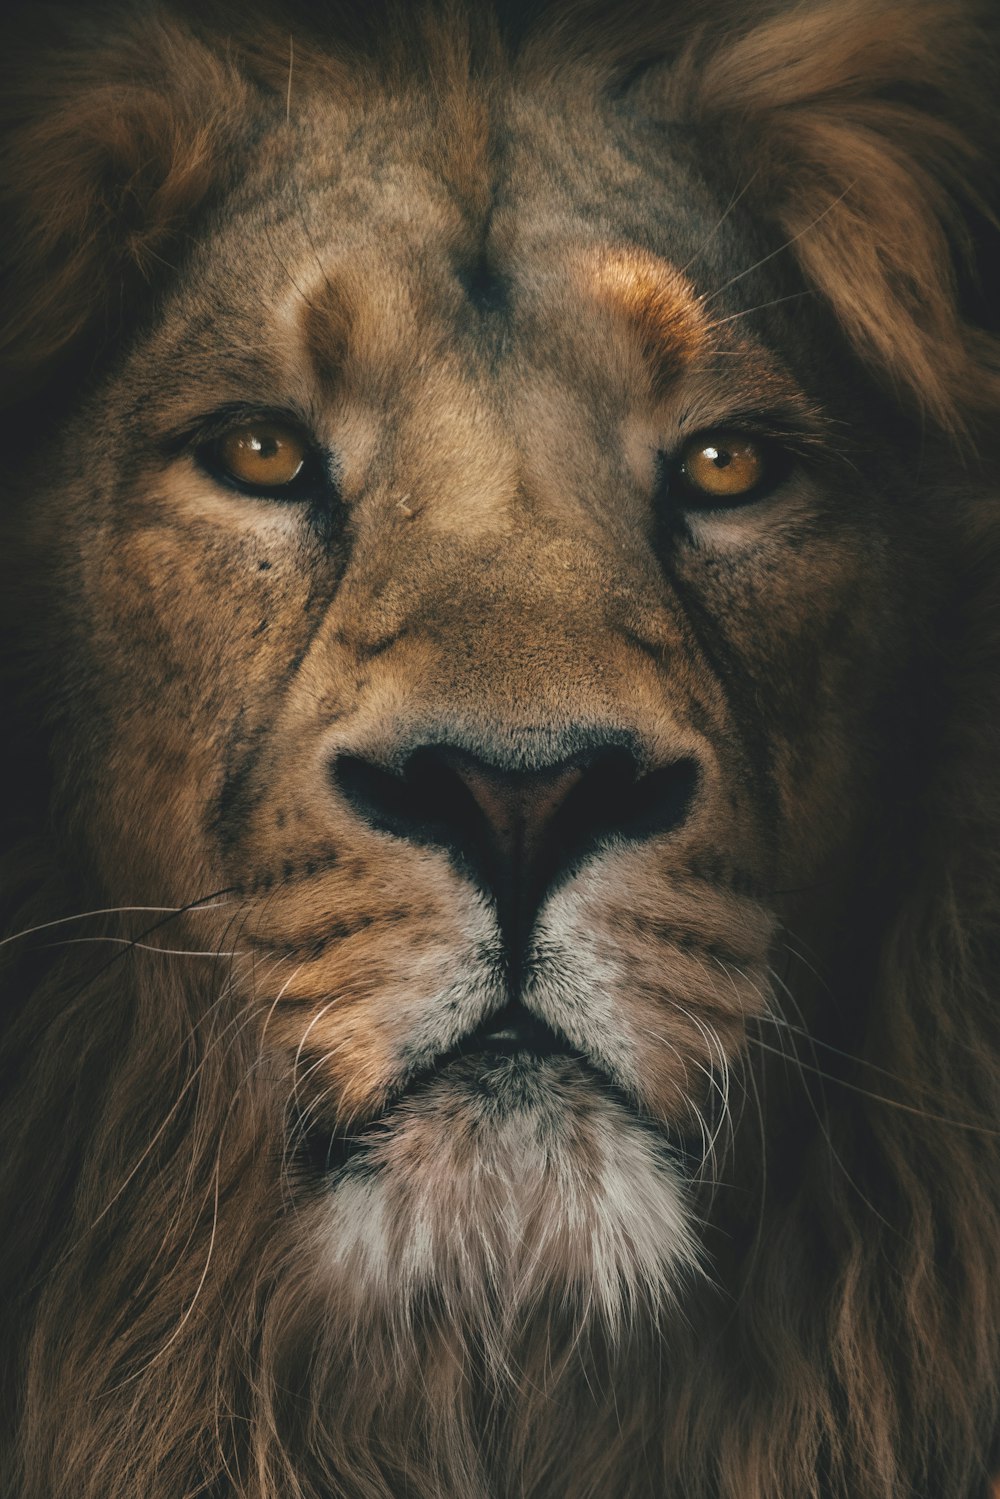 700+] Lion Wallpapers